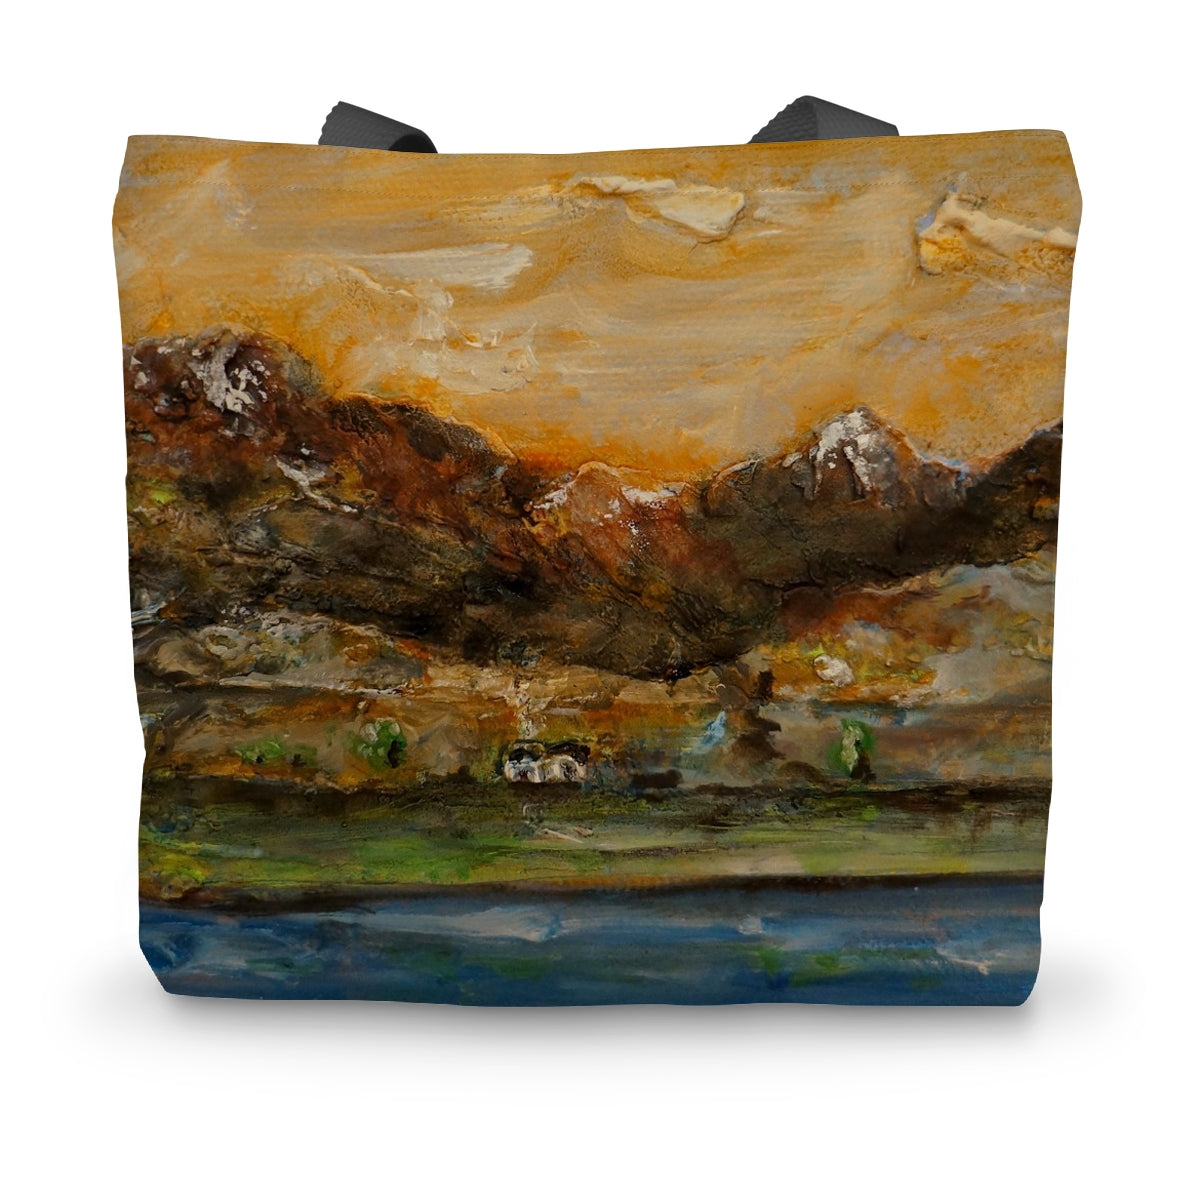 A Glencoe Cottage Art Gifts Canvas Tote Bag-Bags-Glencoe Art Gallery-14"x18.5"-Paintings, Prints, Homeware, Art Gifts From Scotland By Scottish Artist Kevin Hunter